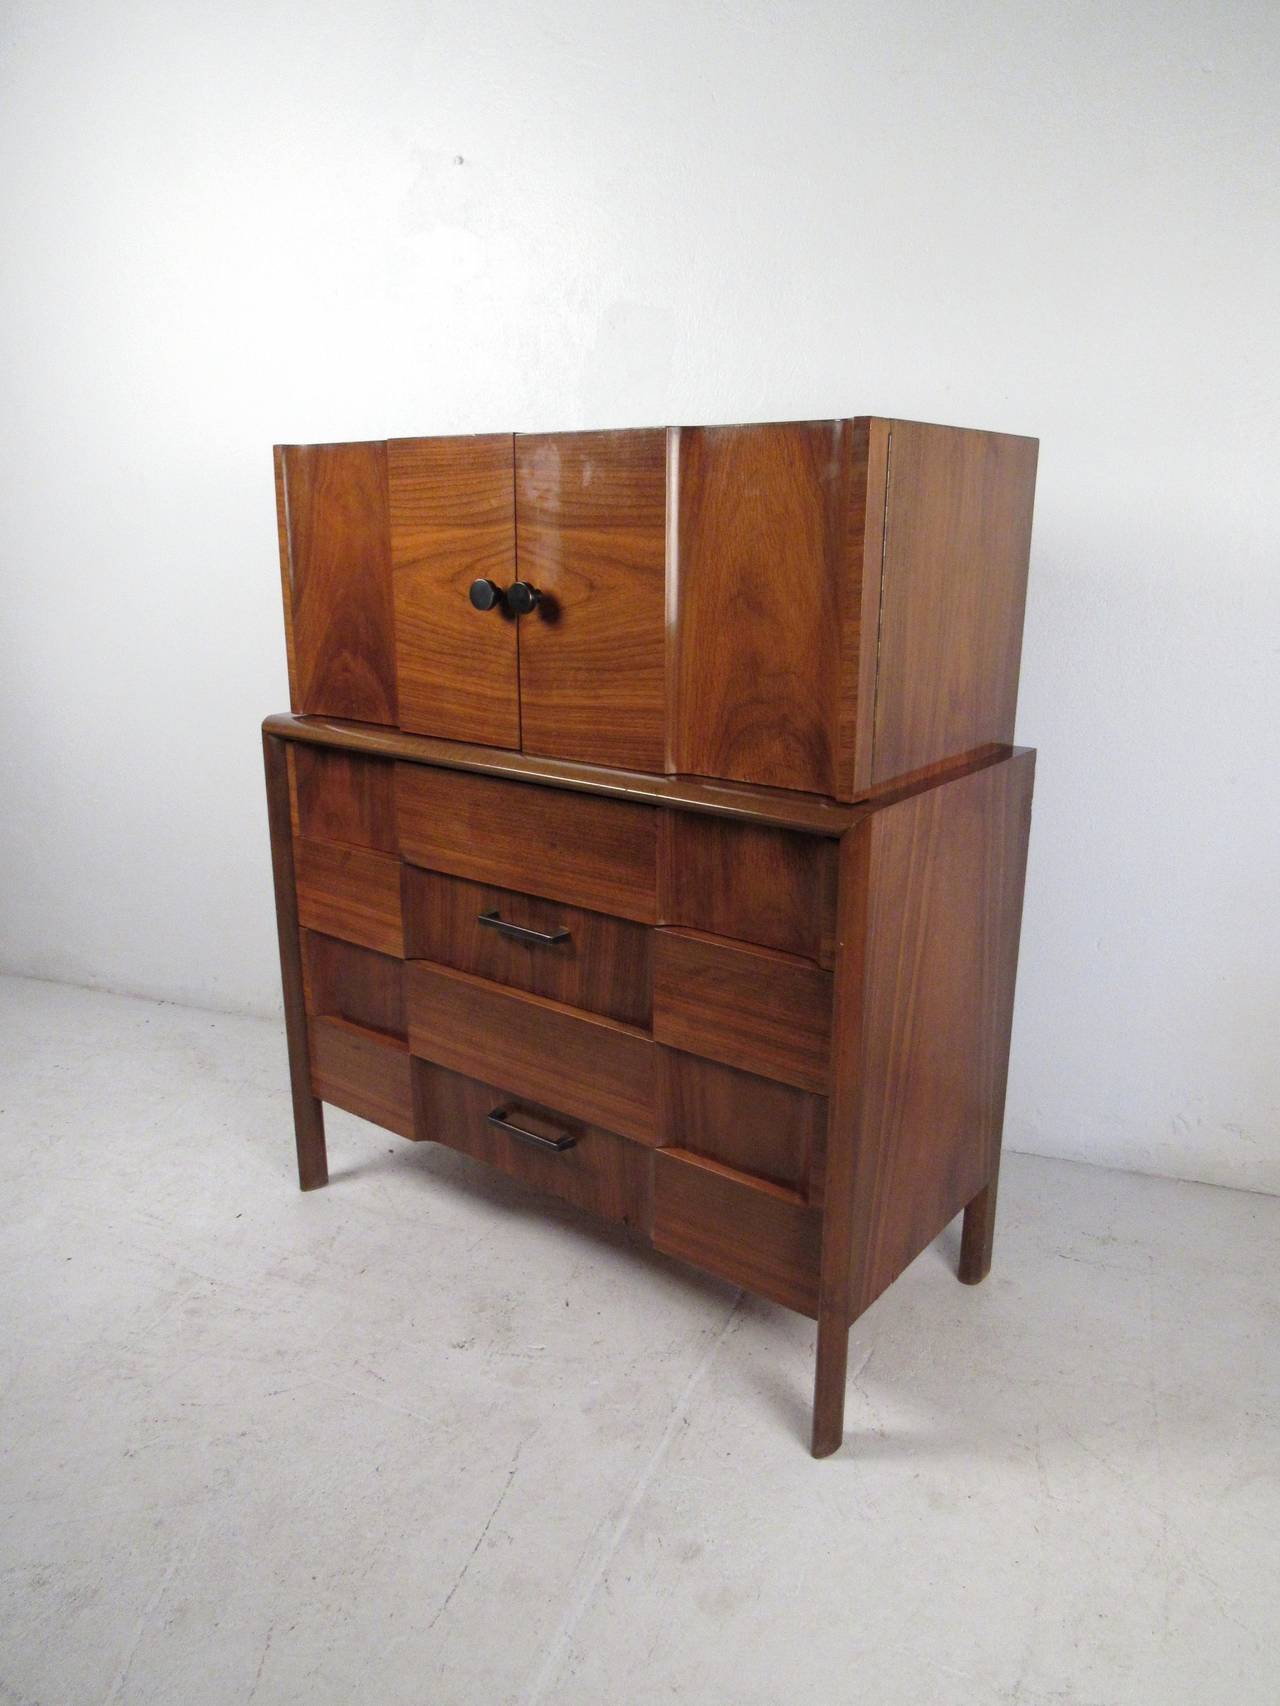 This midcentury high boy dresser features a beautiful patchwork finish in the style of Paul Evans which offers a modern flare to any home or office space.

Please confirm item location (NY or NJ) with dealer.